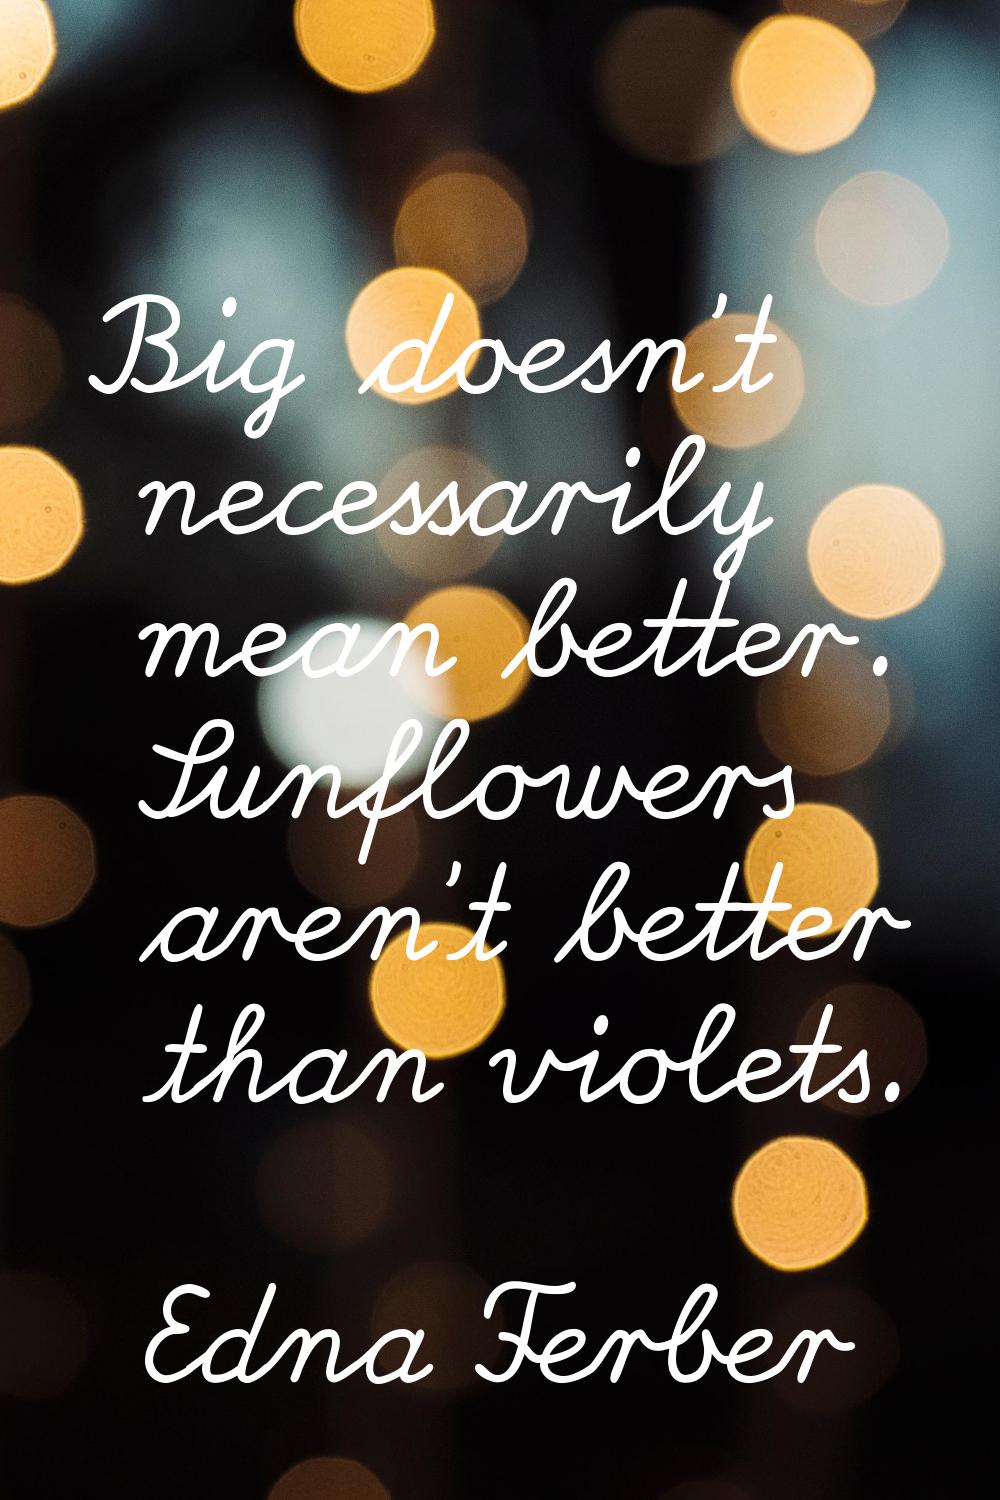 Big doesn't necessarily mean better. Sunflowers aren't better than violets.